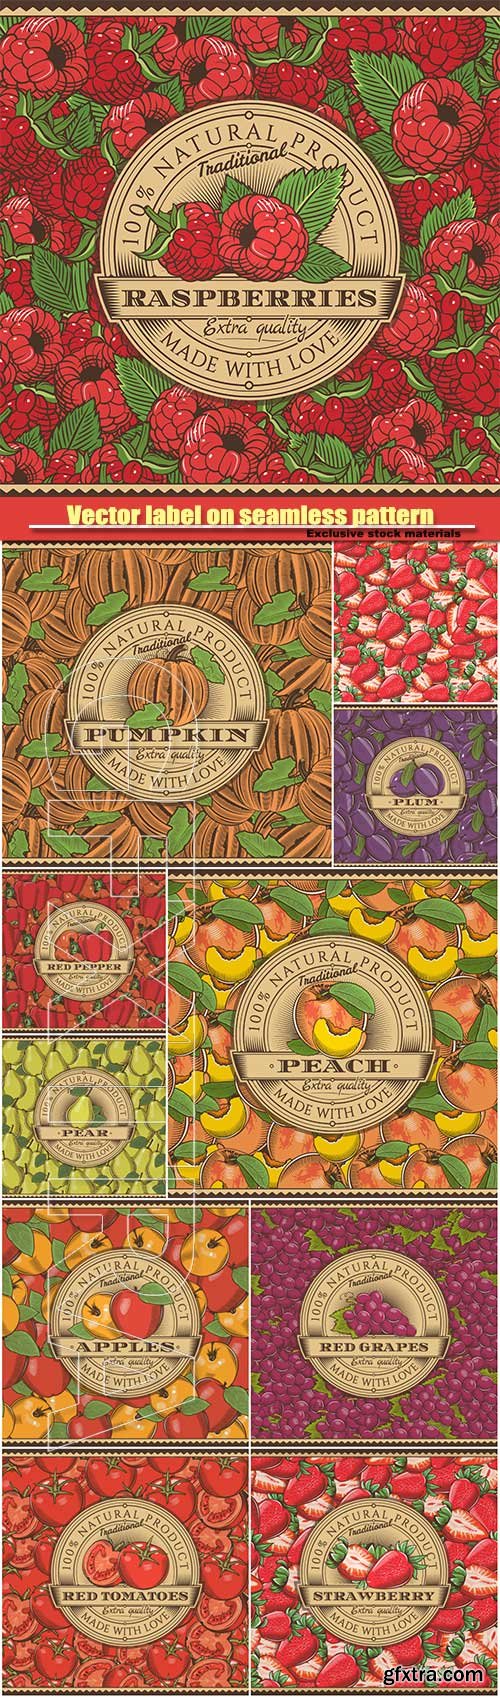 Vector label on seamless pattern in vintage style